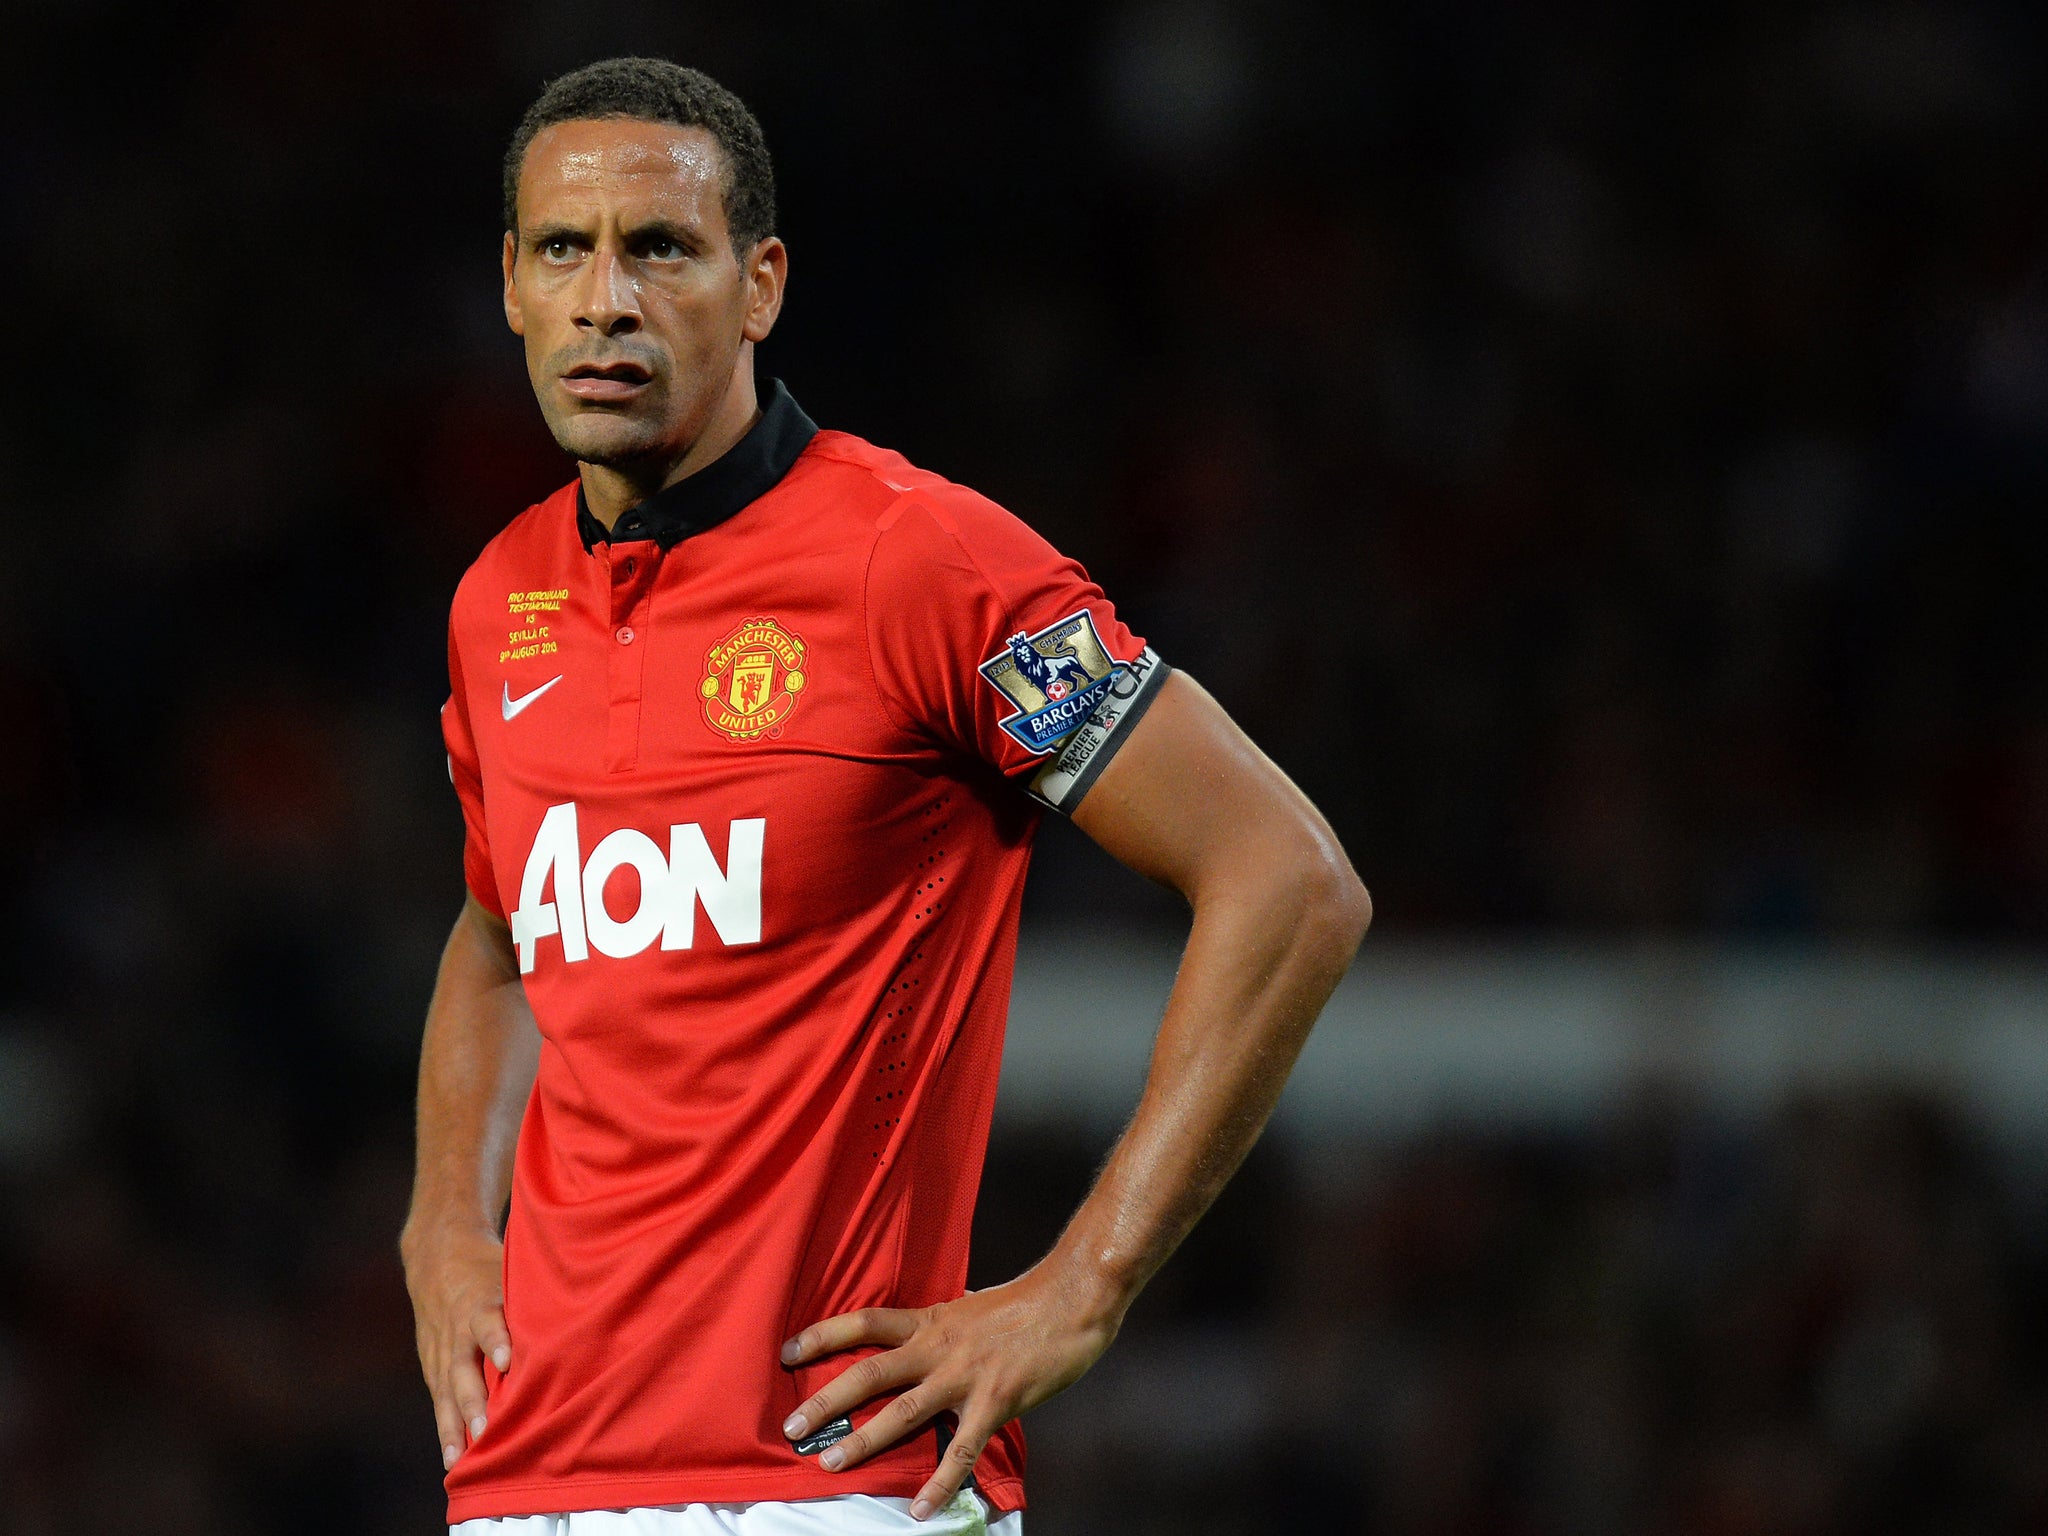 Rio Ferdinand's testimonial ended in defeat for Manchester United against Sevilla